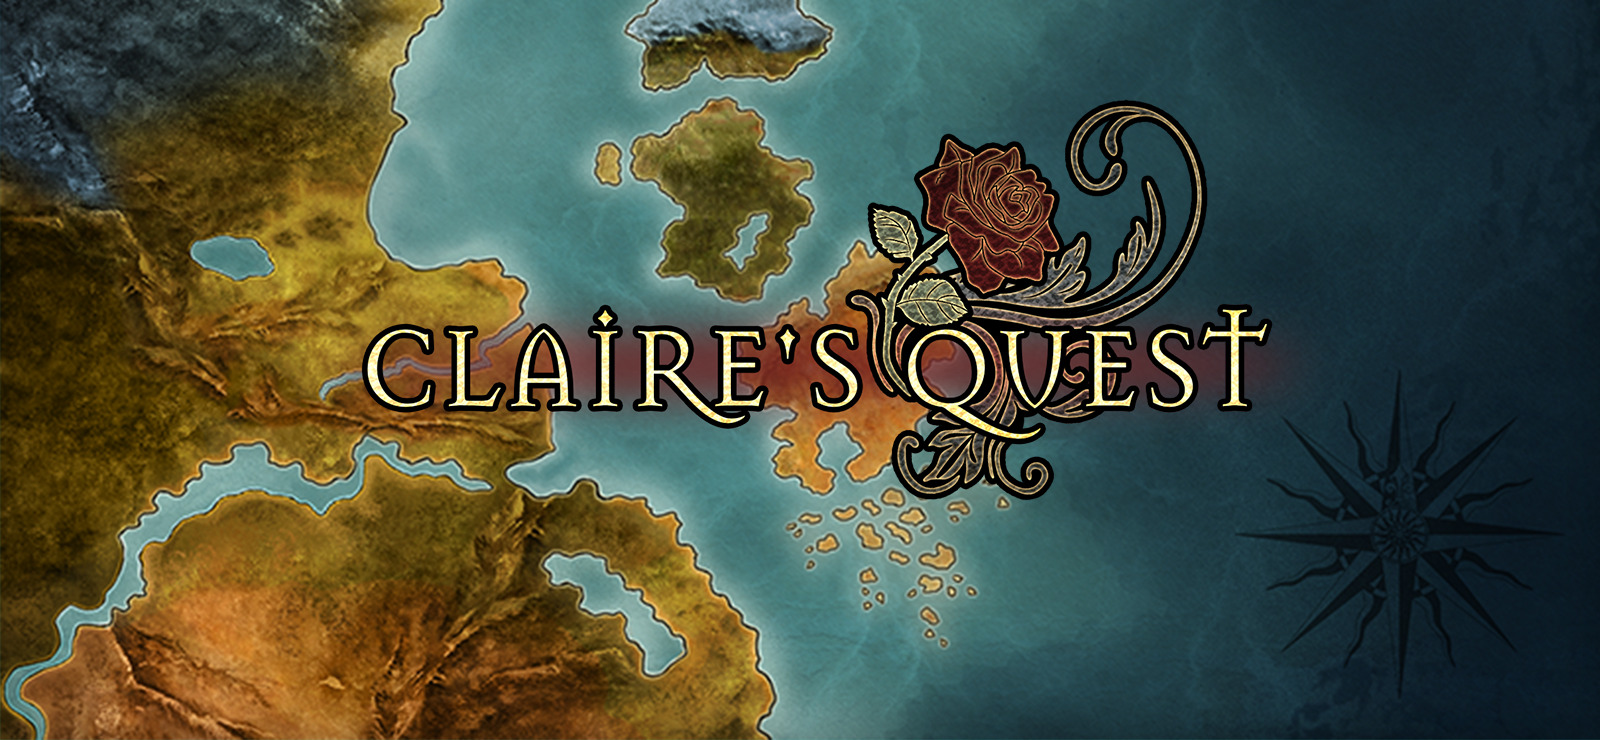 Claire's quest game